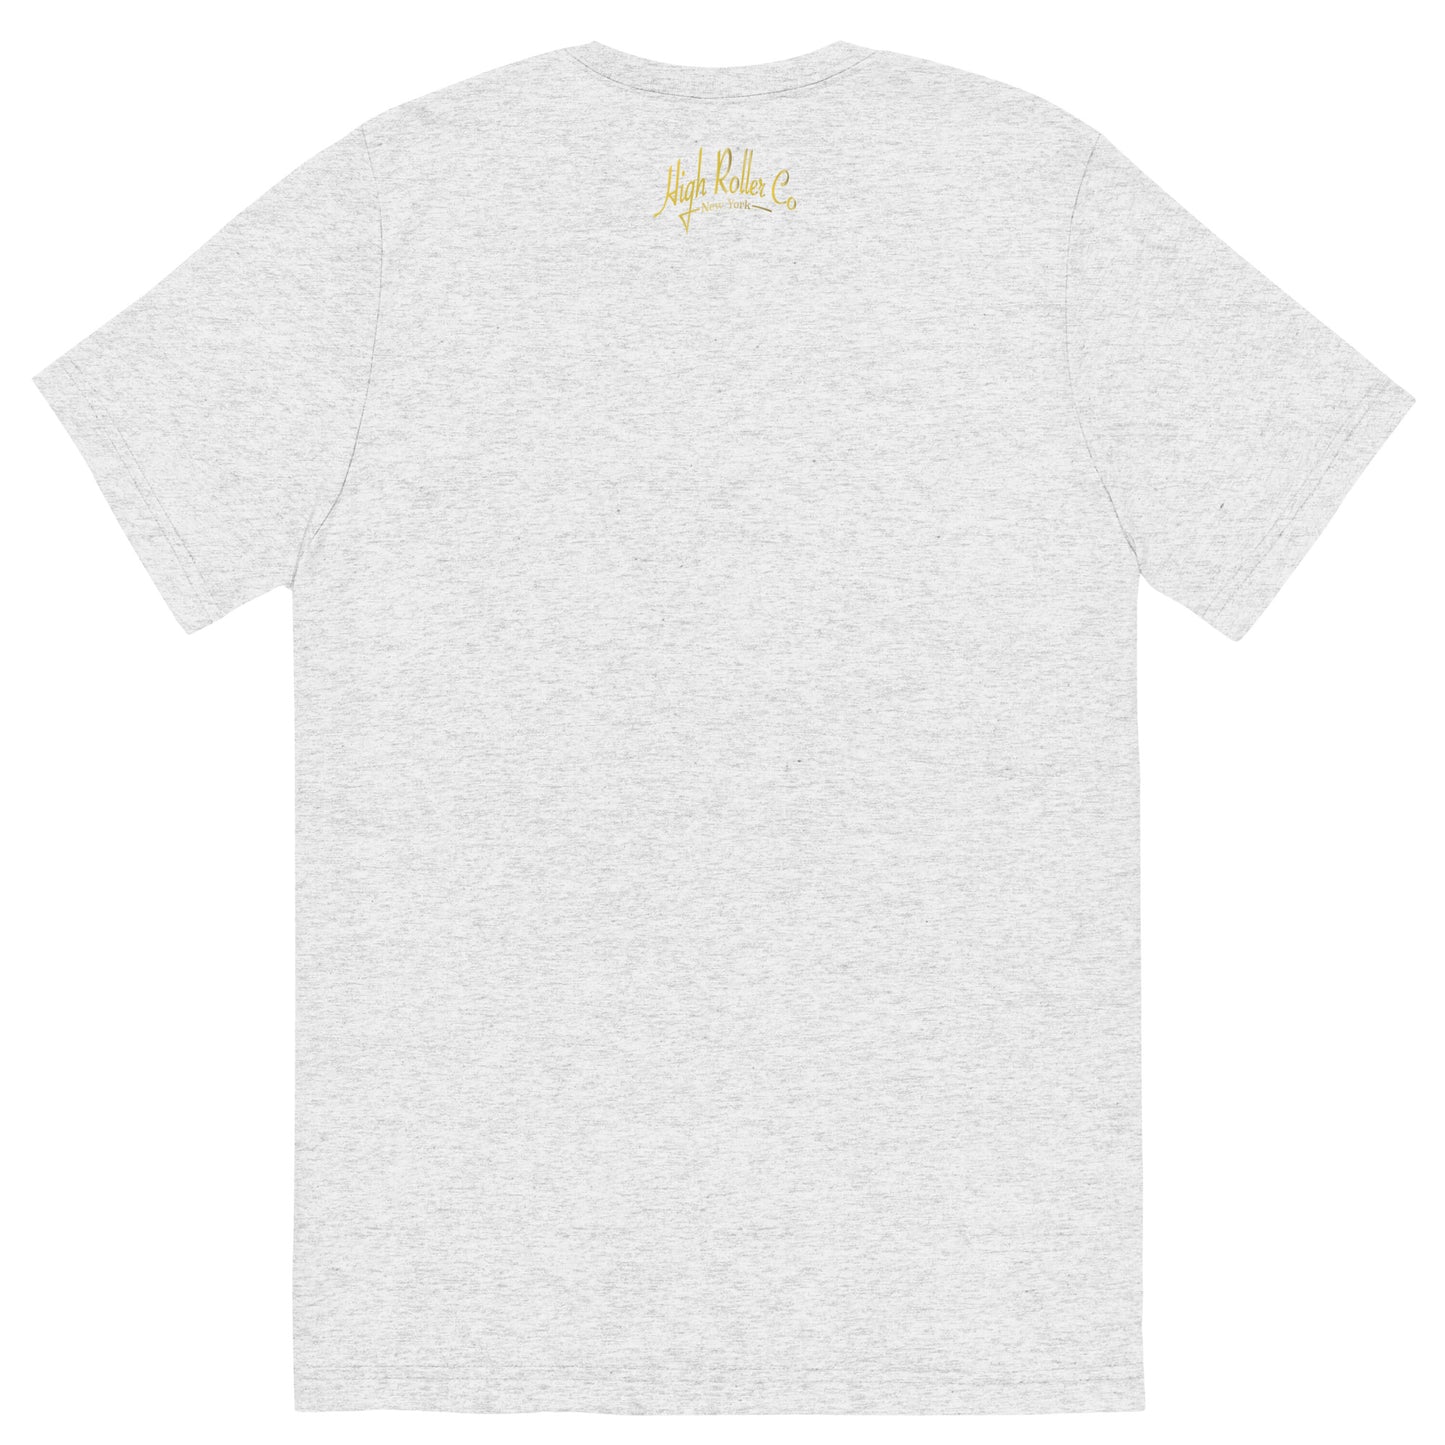 High Roller Co. Embroidered Logo Tee